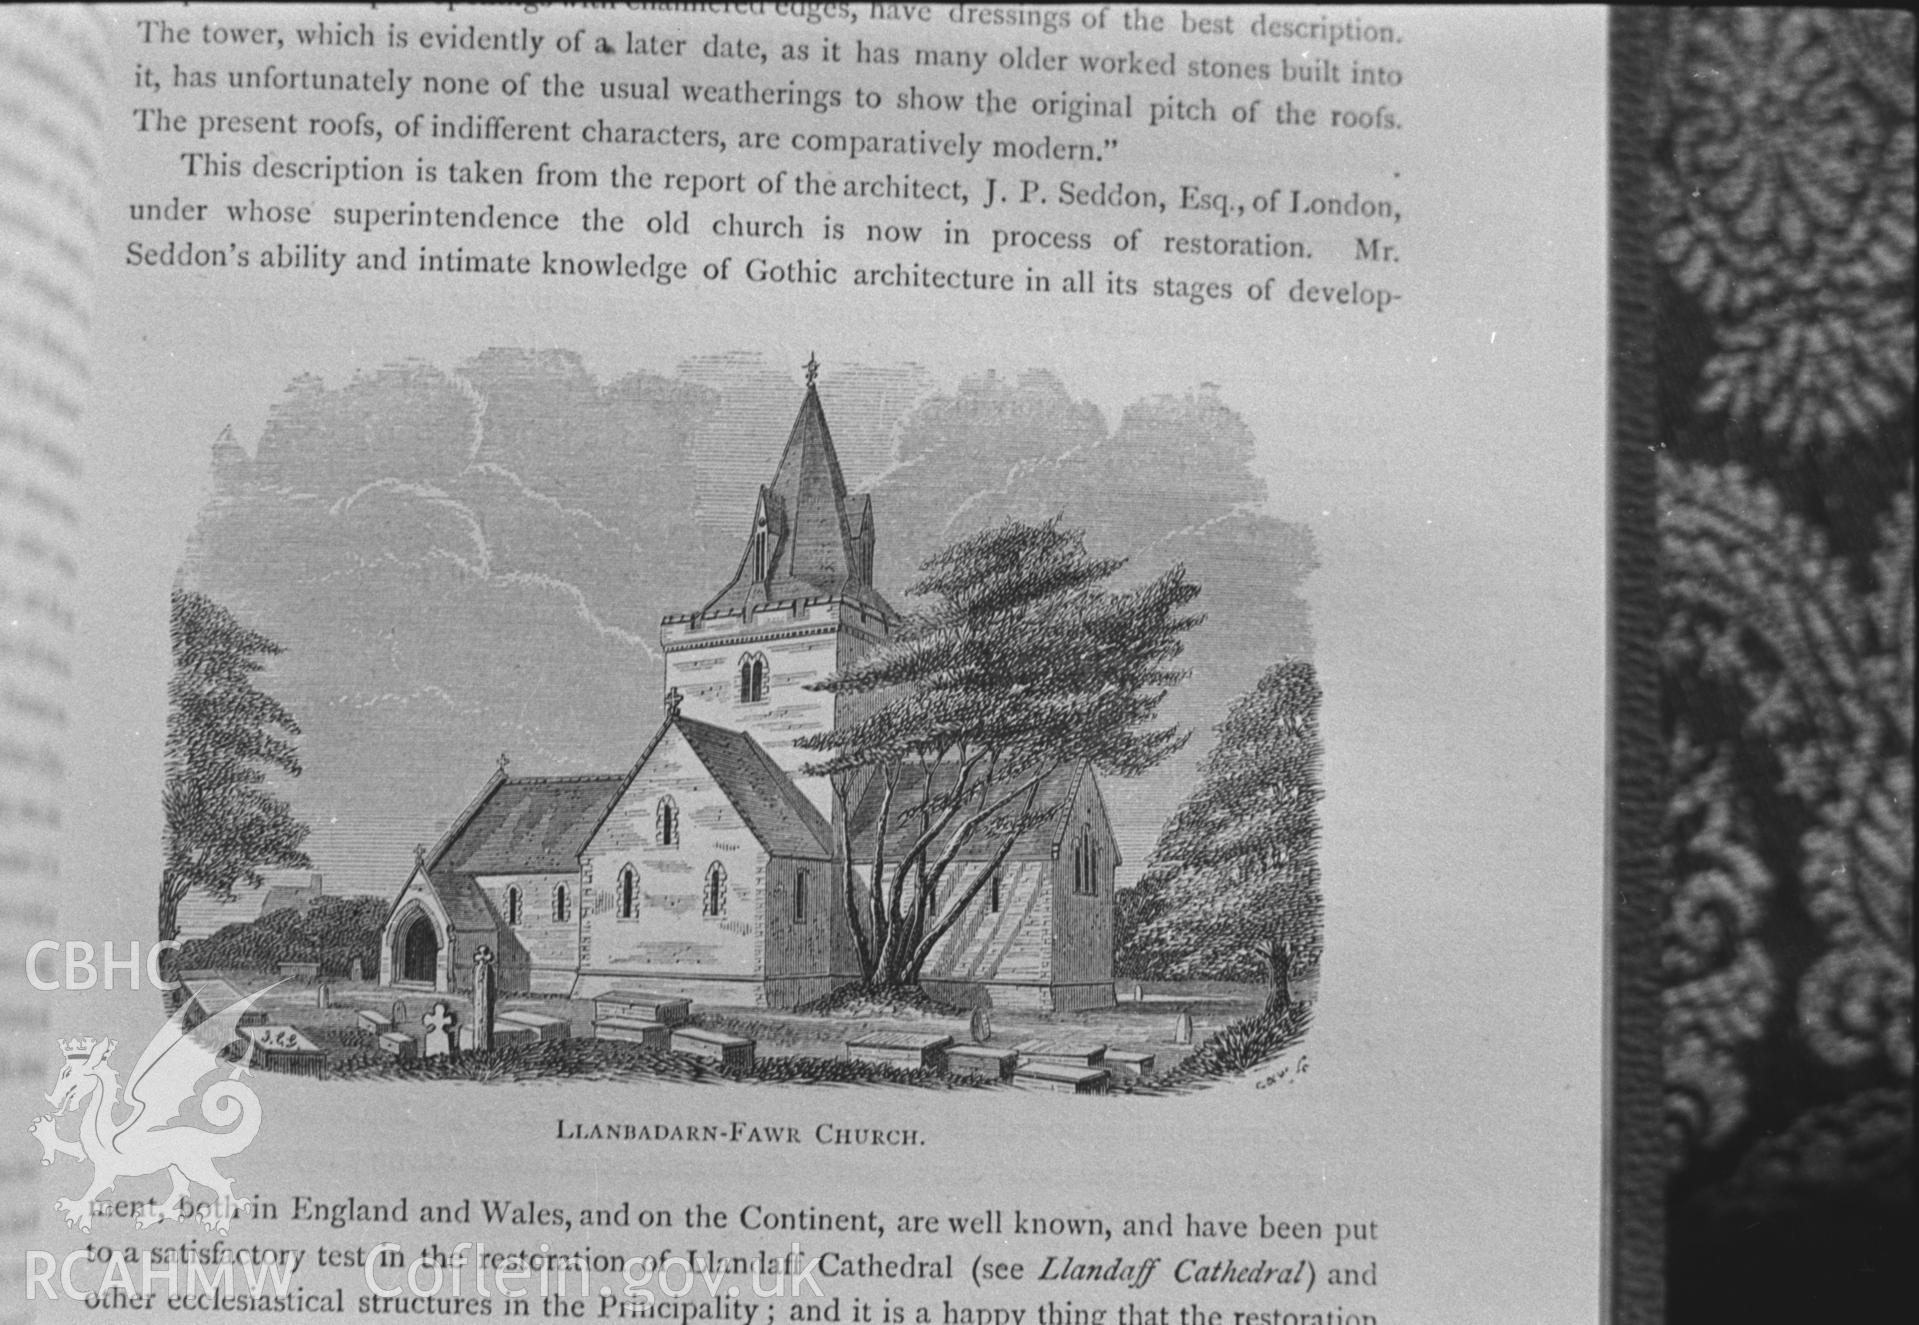 Drawing entitled 'Llanbadarn-Fawr Church.' From 'Annals of the counties and county families of Wales' vol 1 by Thomas Nicholas, 1872. Photographed by Arthur O. Chater in January 1968 for his own private research.